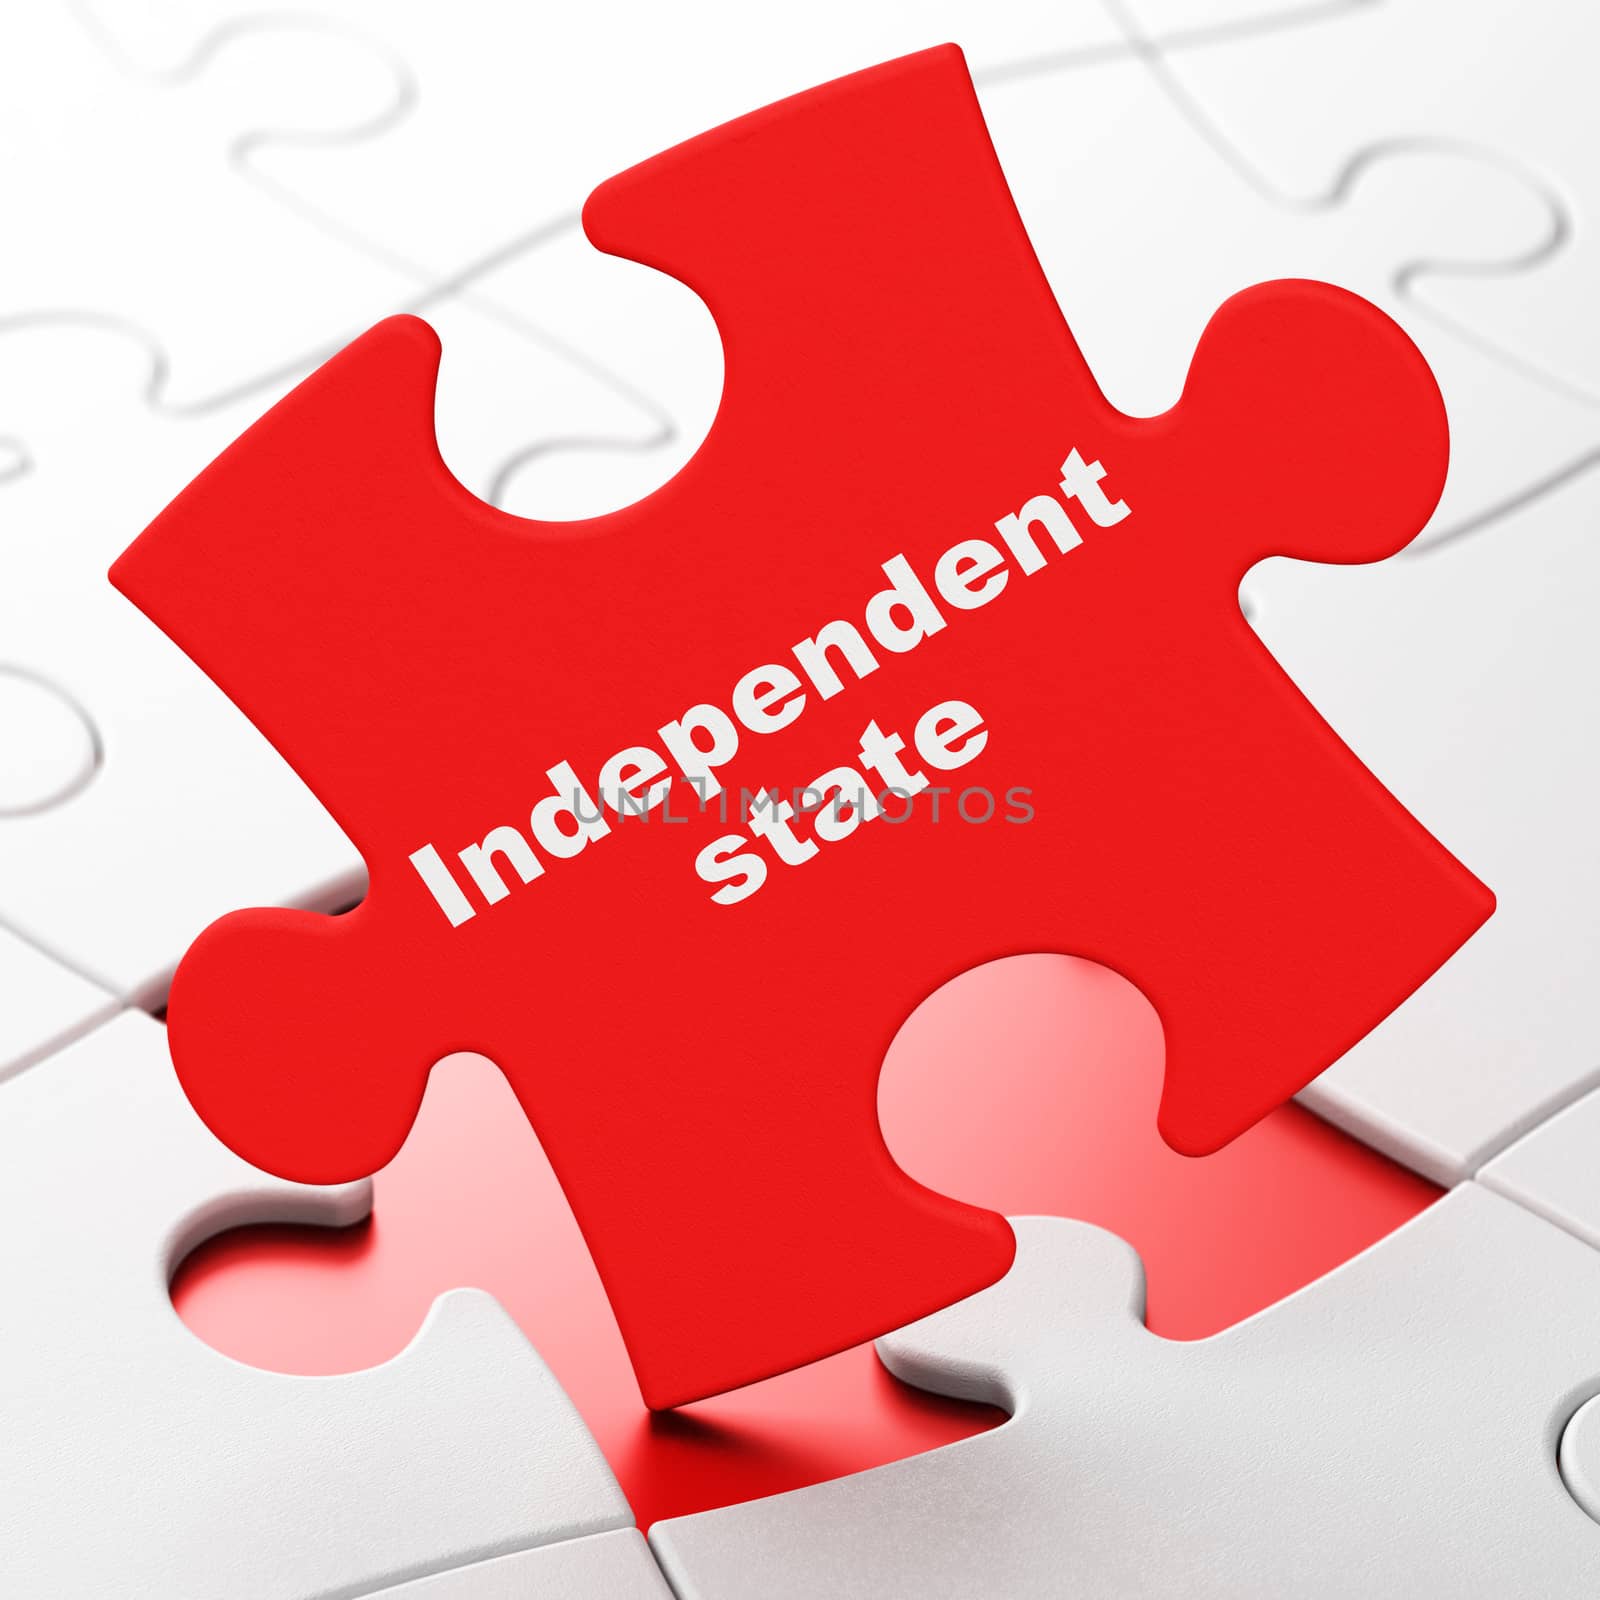 Politics concept: Independent State on Red puzzle pieces background, 3D rendering